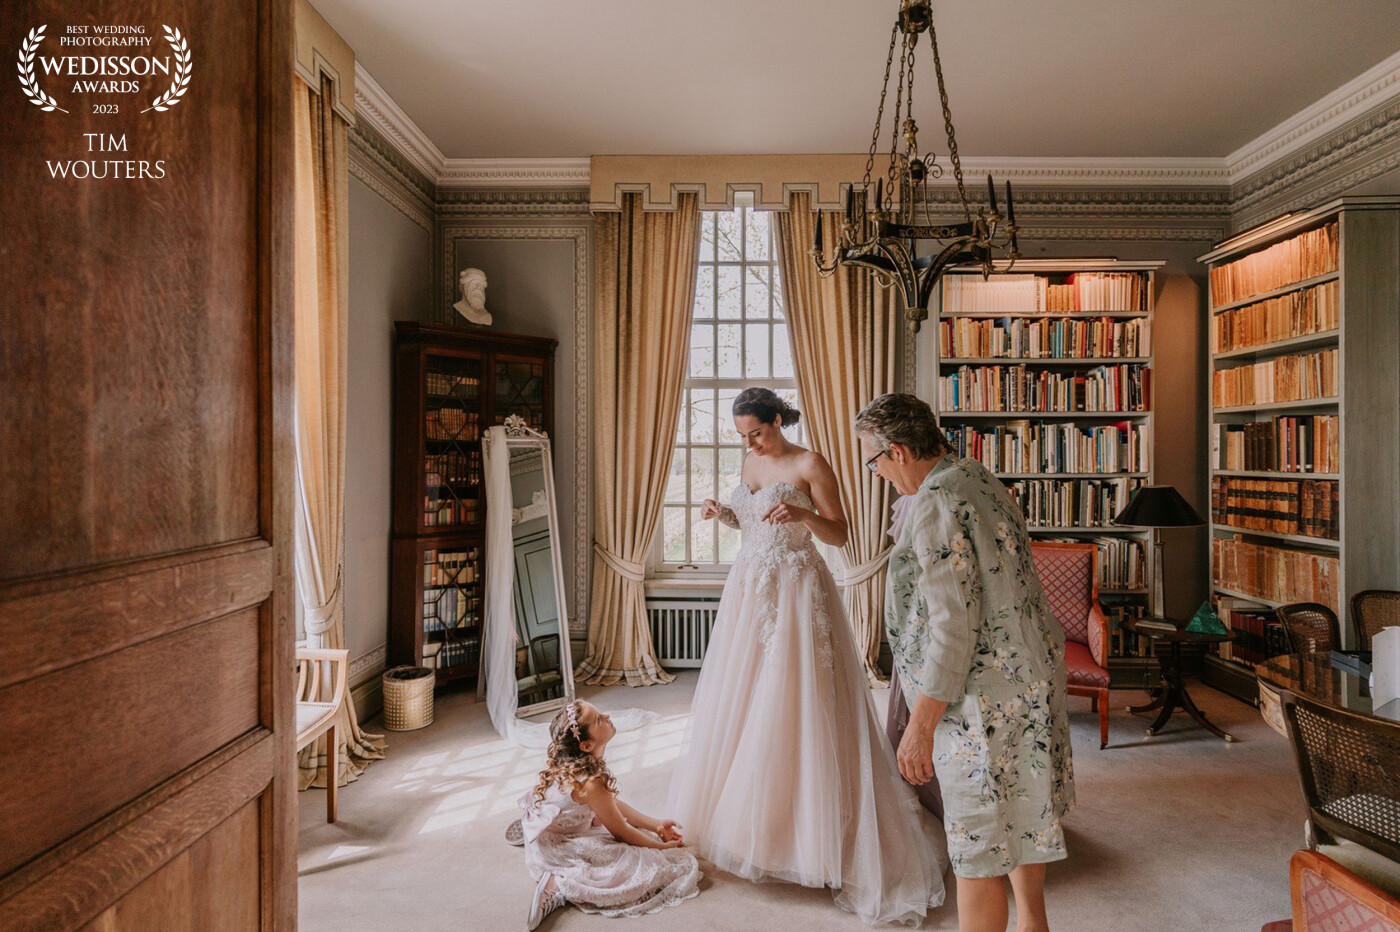 I love when our couples chose a incredible place to get ready. Like this book room inside a Castle. The ligt was perfect and her daughter helping her mom toghetter with the Mother of the bride. It was just perfect!